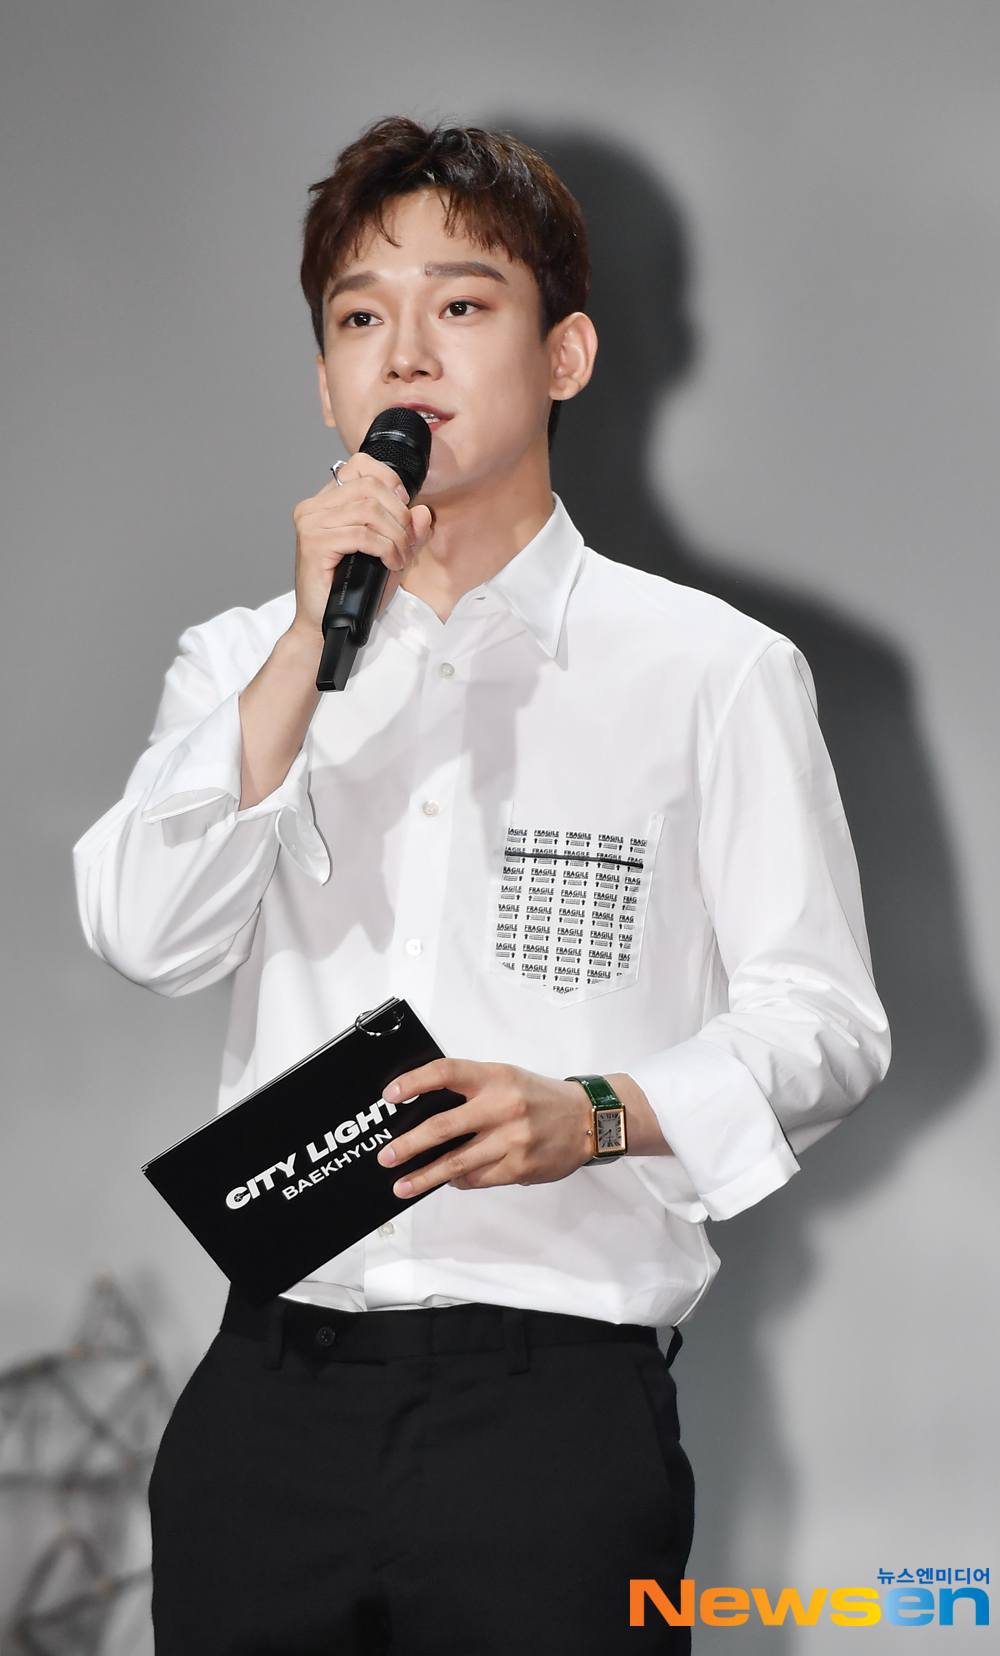 EXO Baekhyuns first solo album Showcase was held at SAC Art Hall in Samseong-dong, Gangnam-gu, Seoul on July 10Chen took charge of the proceedings on the day.Baekhyuns first mini-album, City Lights, will be released today at 6 p.m. on various music sites, including the title song UN Village (UN Village), Stay Up (Stay Up), Betcha (Betcha), Ice Queen (Ice Queen), Diamond (Diamond) Almond), Psycho (Psycho) and six songs, you can meet Baekhyuns outstanding vocals and sensual music worldexpressiveness